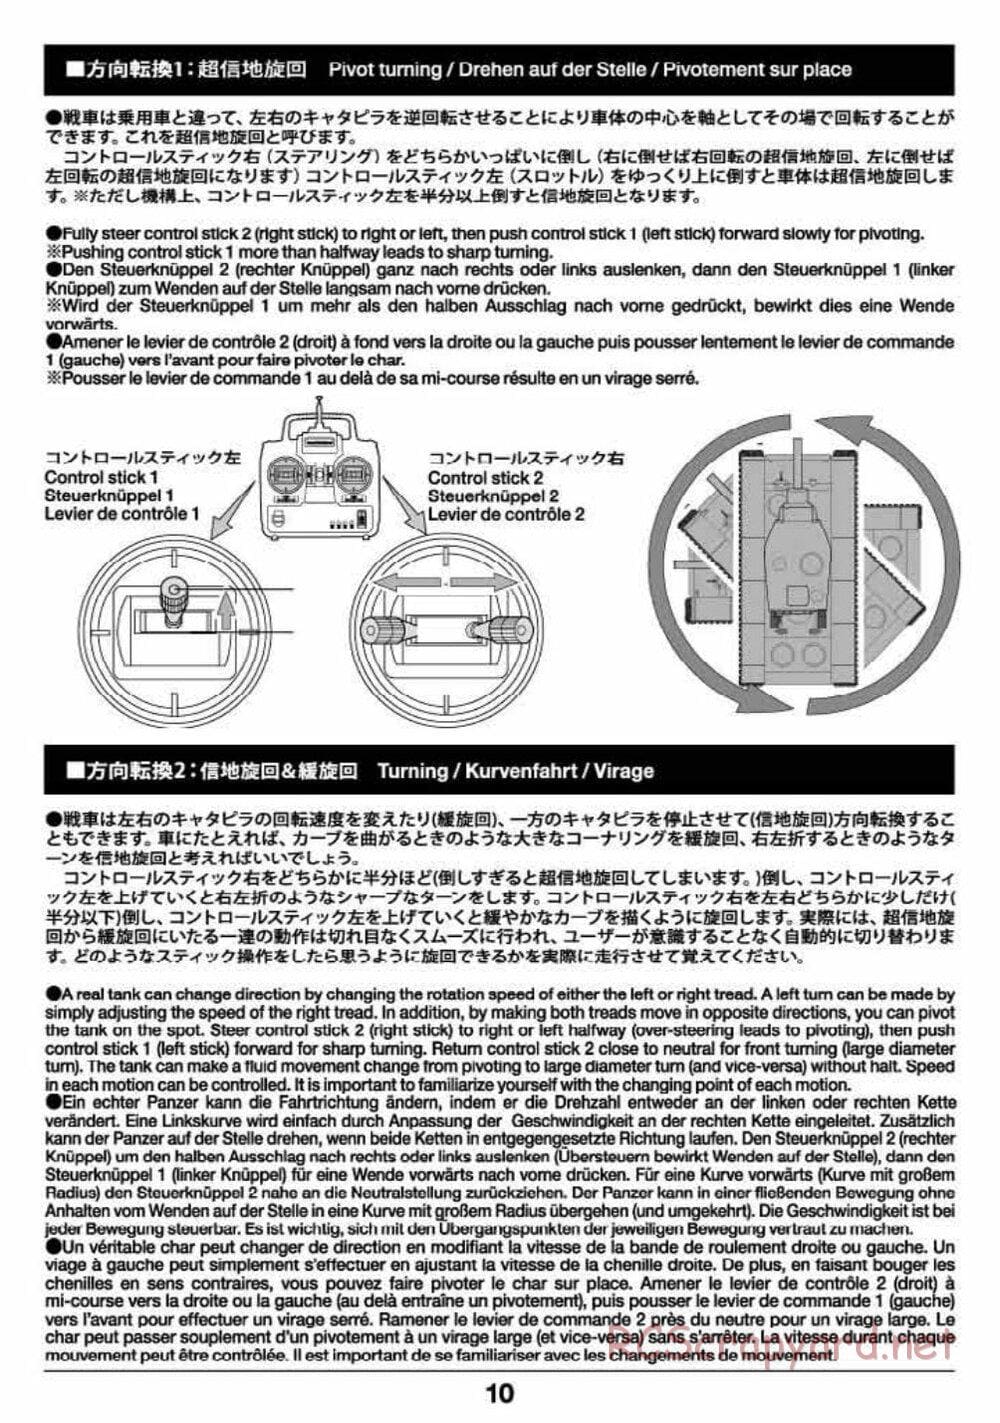 Tamiya - Russian Heavy Tank KV-2 Gigant - 1/16 Scale Chassis - Operation Manual - Page 10